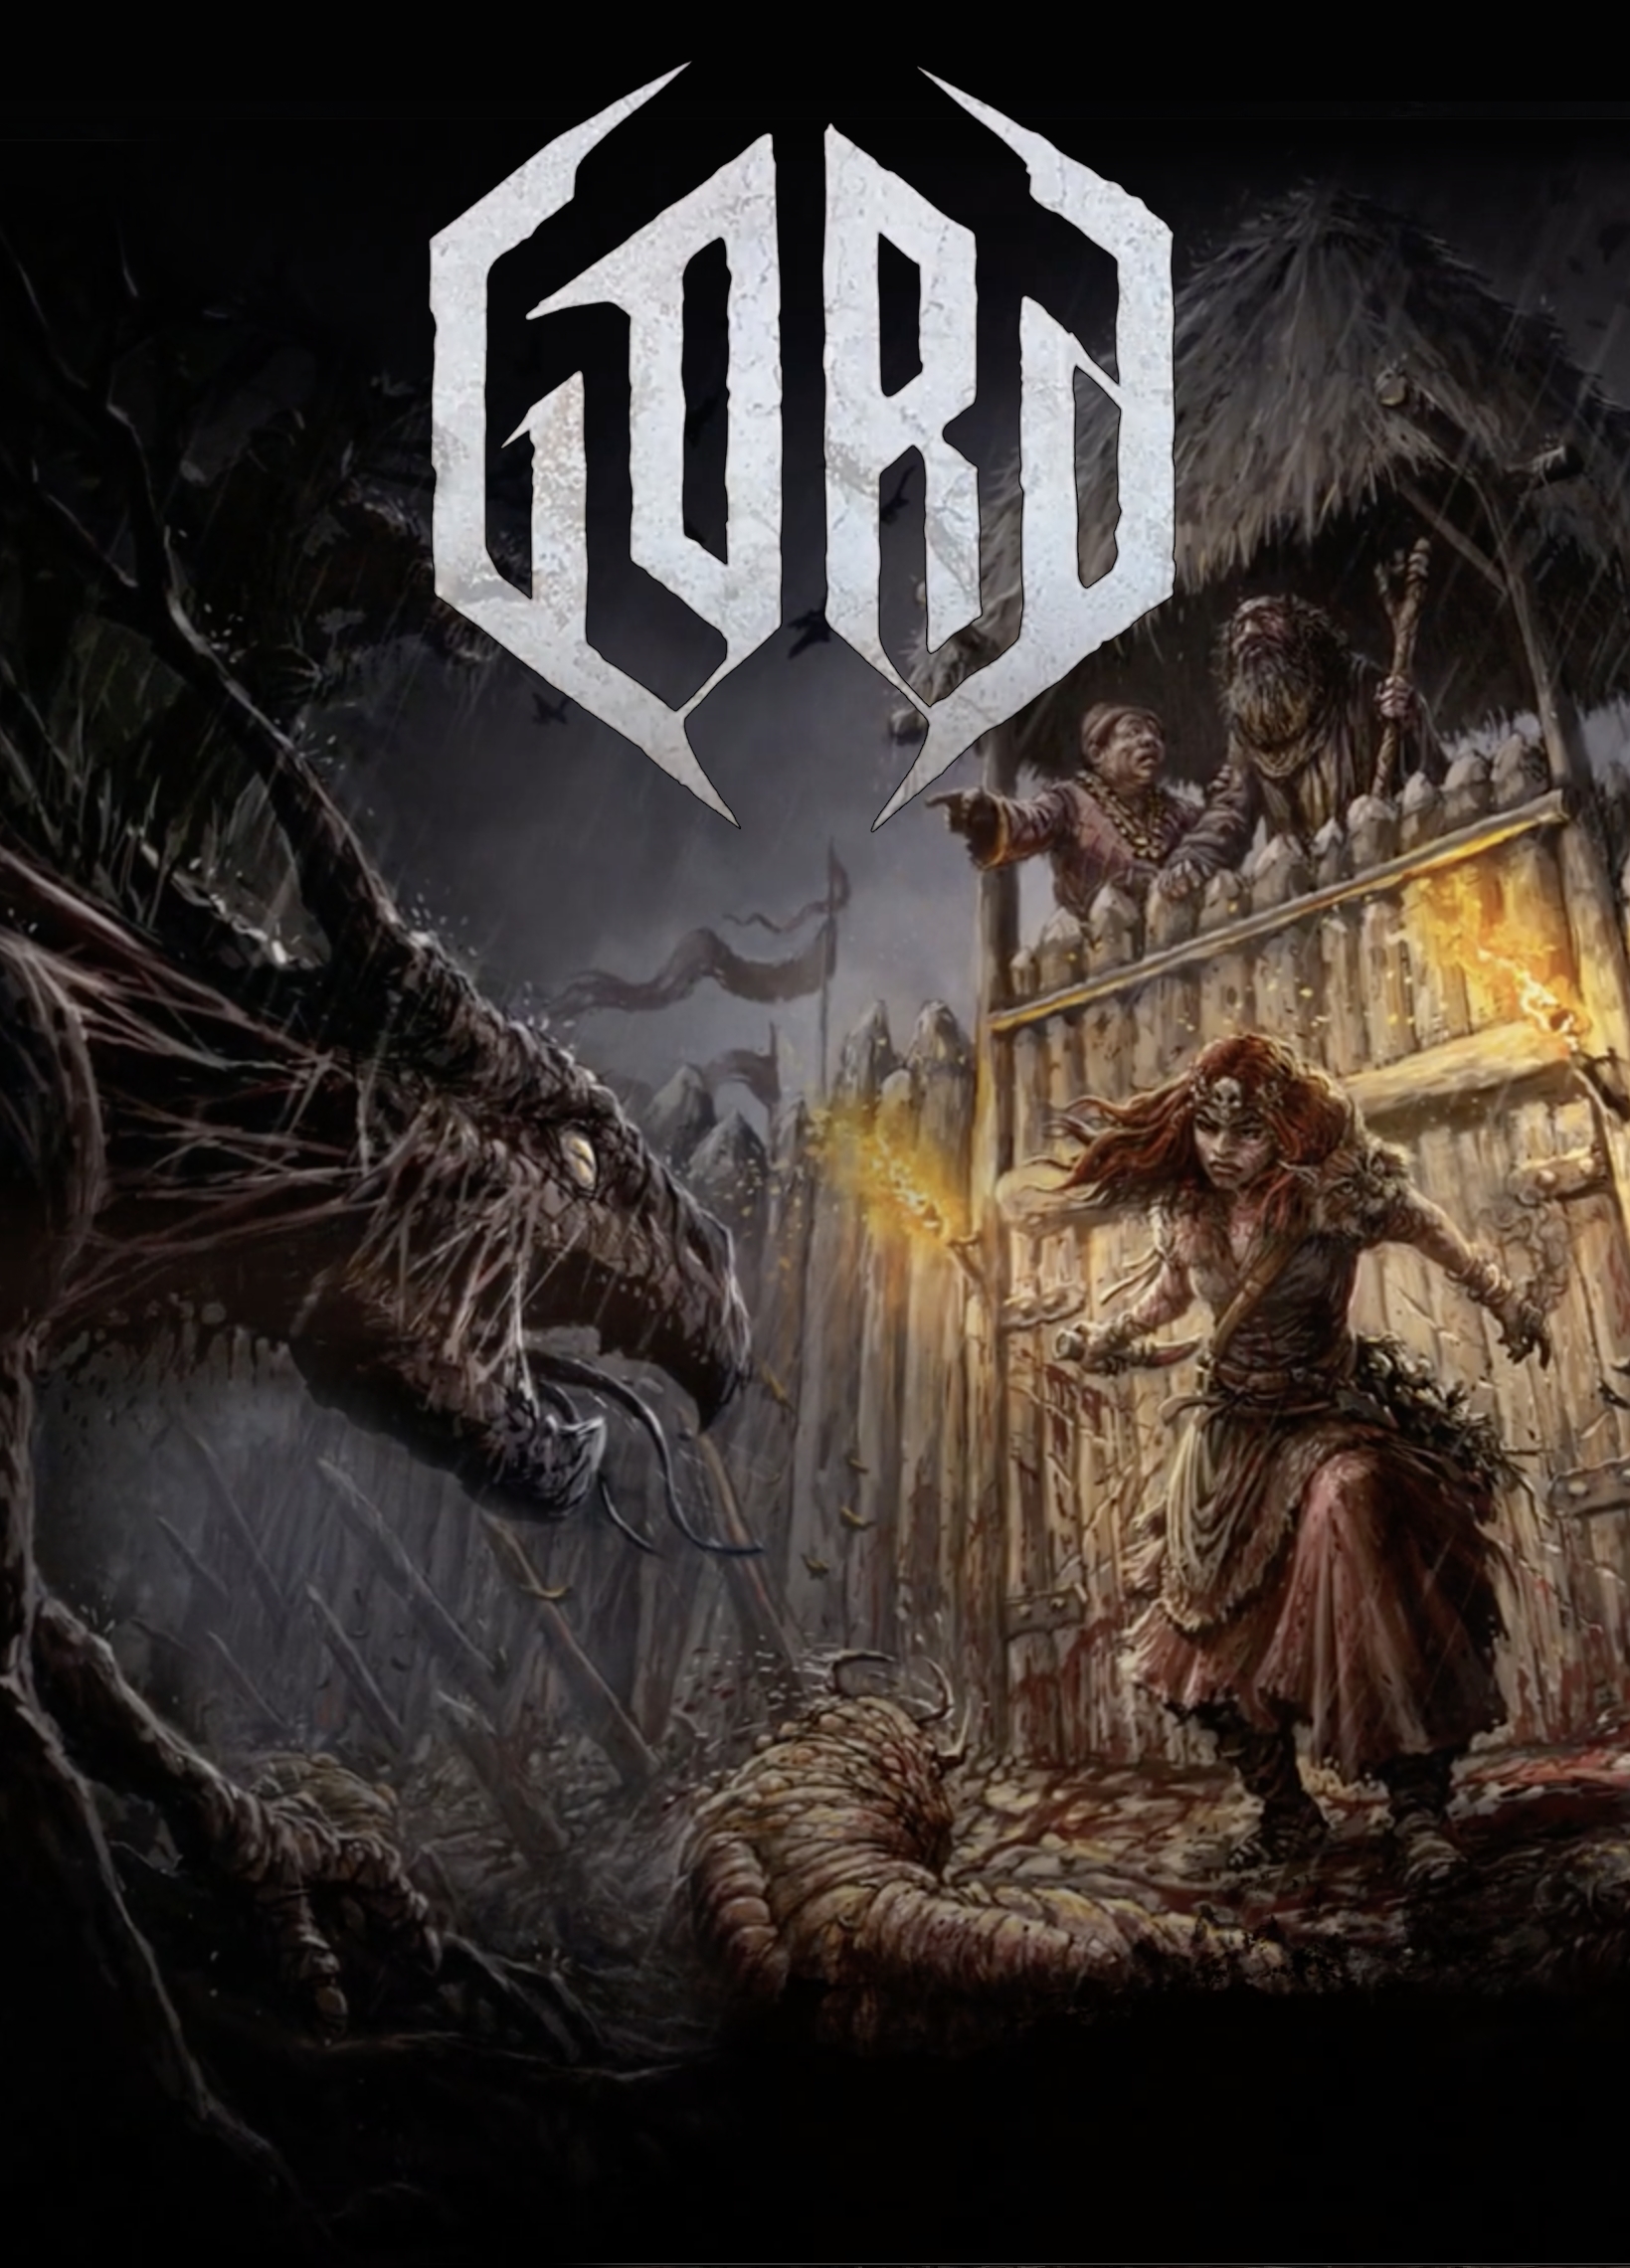 Gord Cover